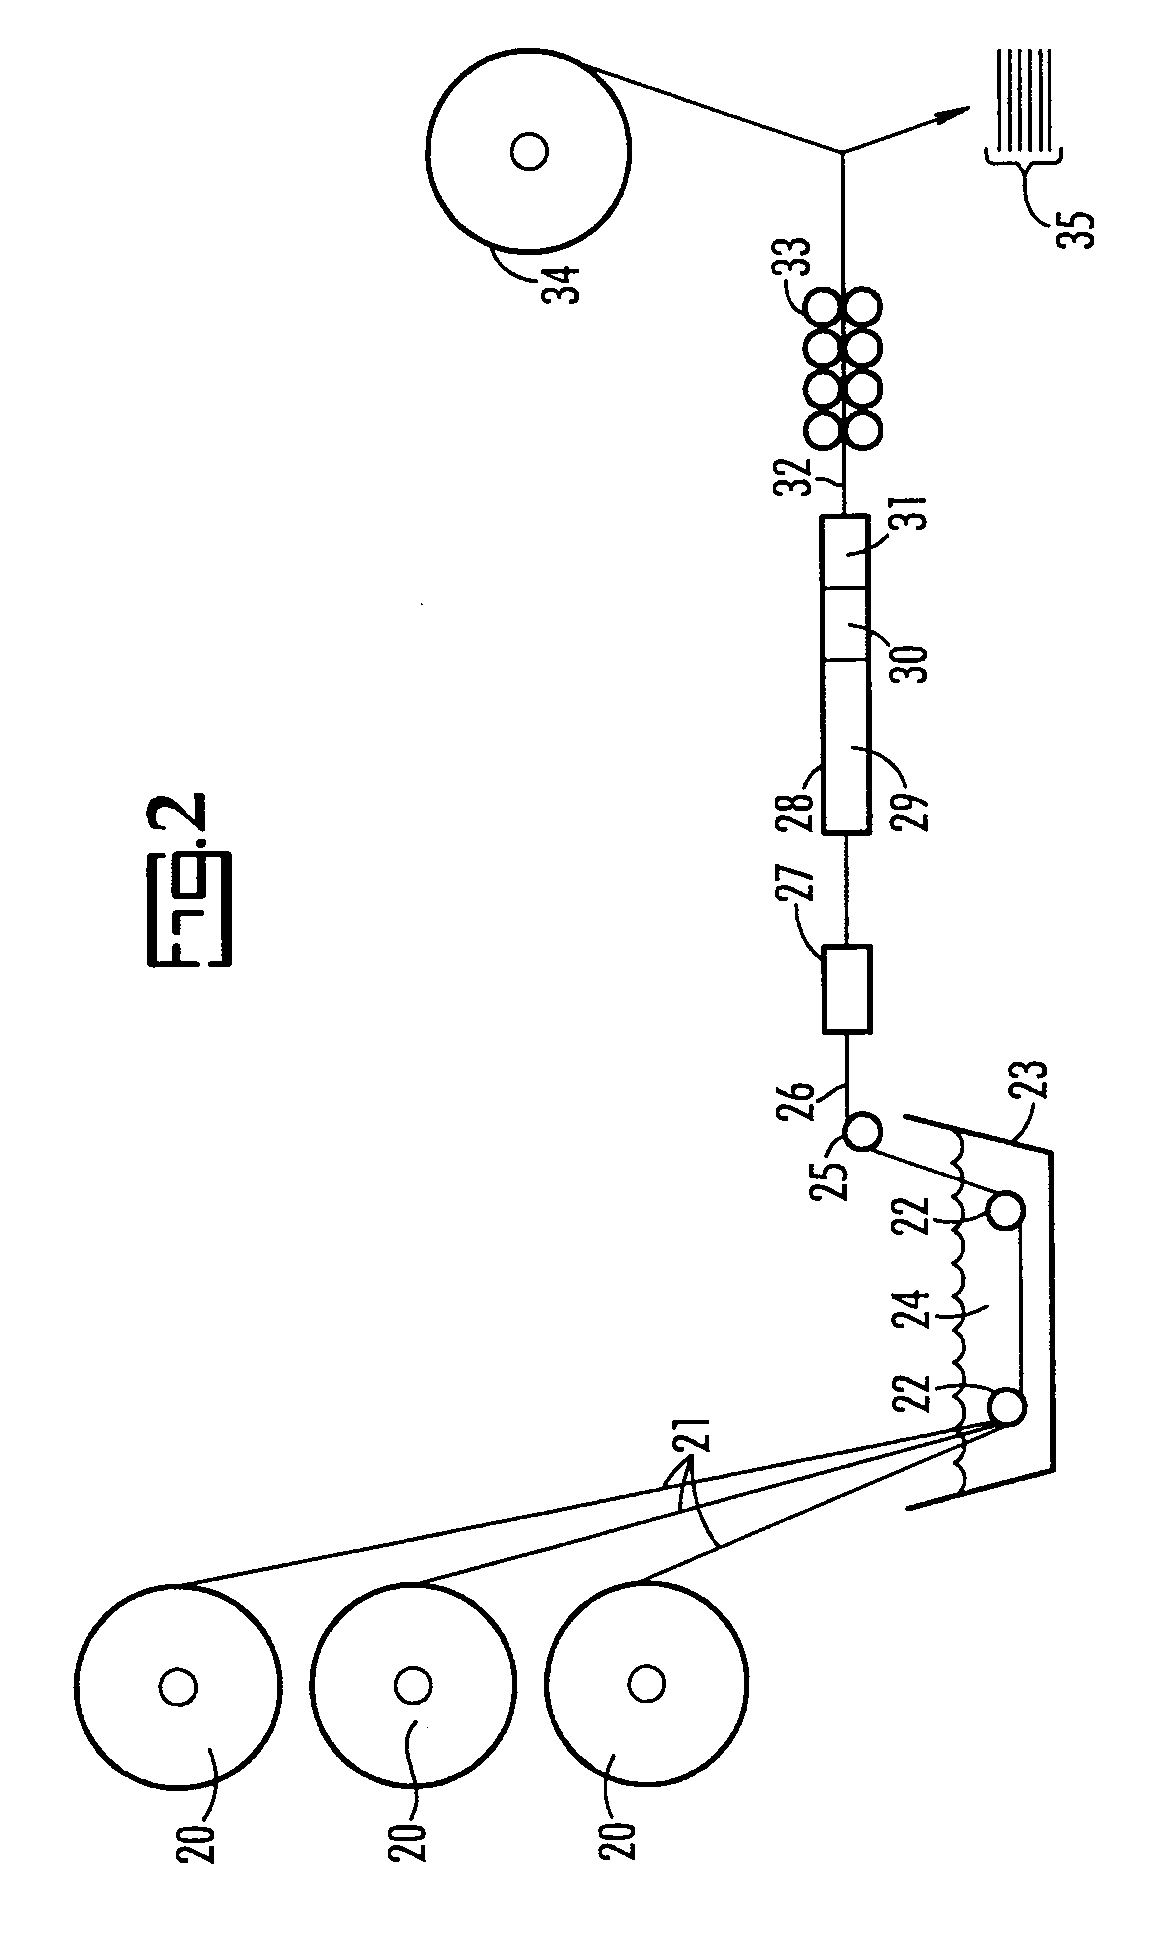 Method of making reinforced PVC plastisol resin and products prepared therewith